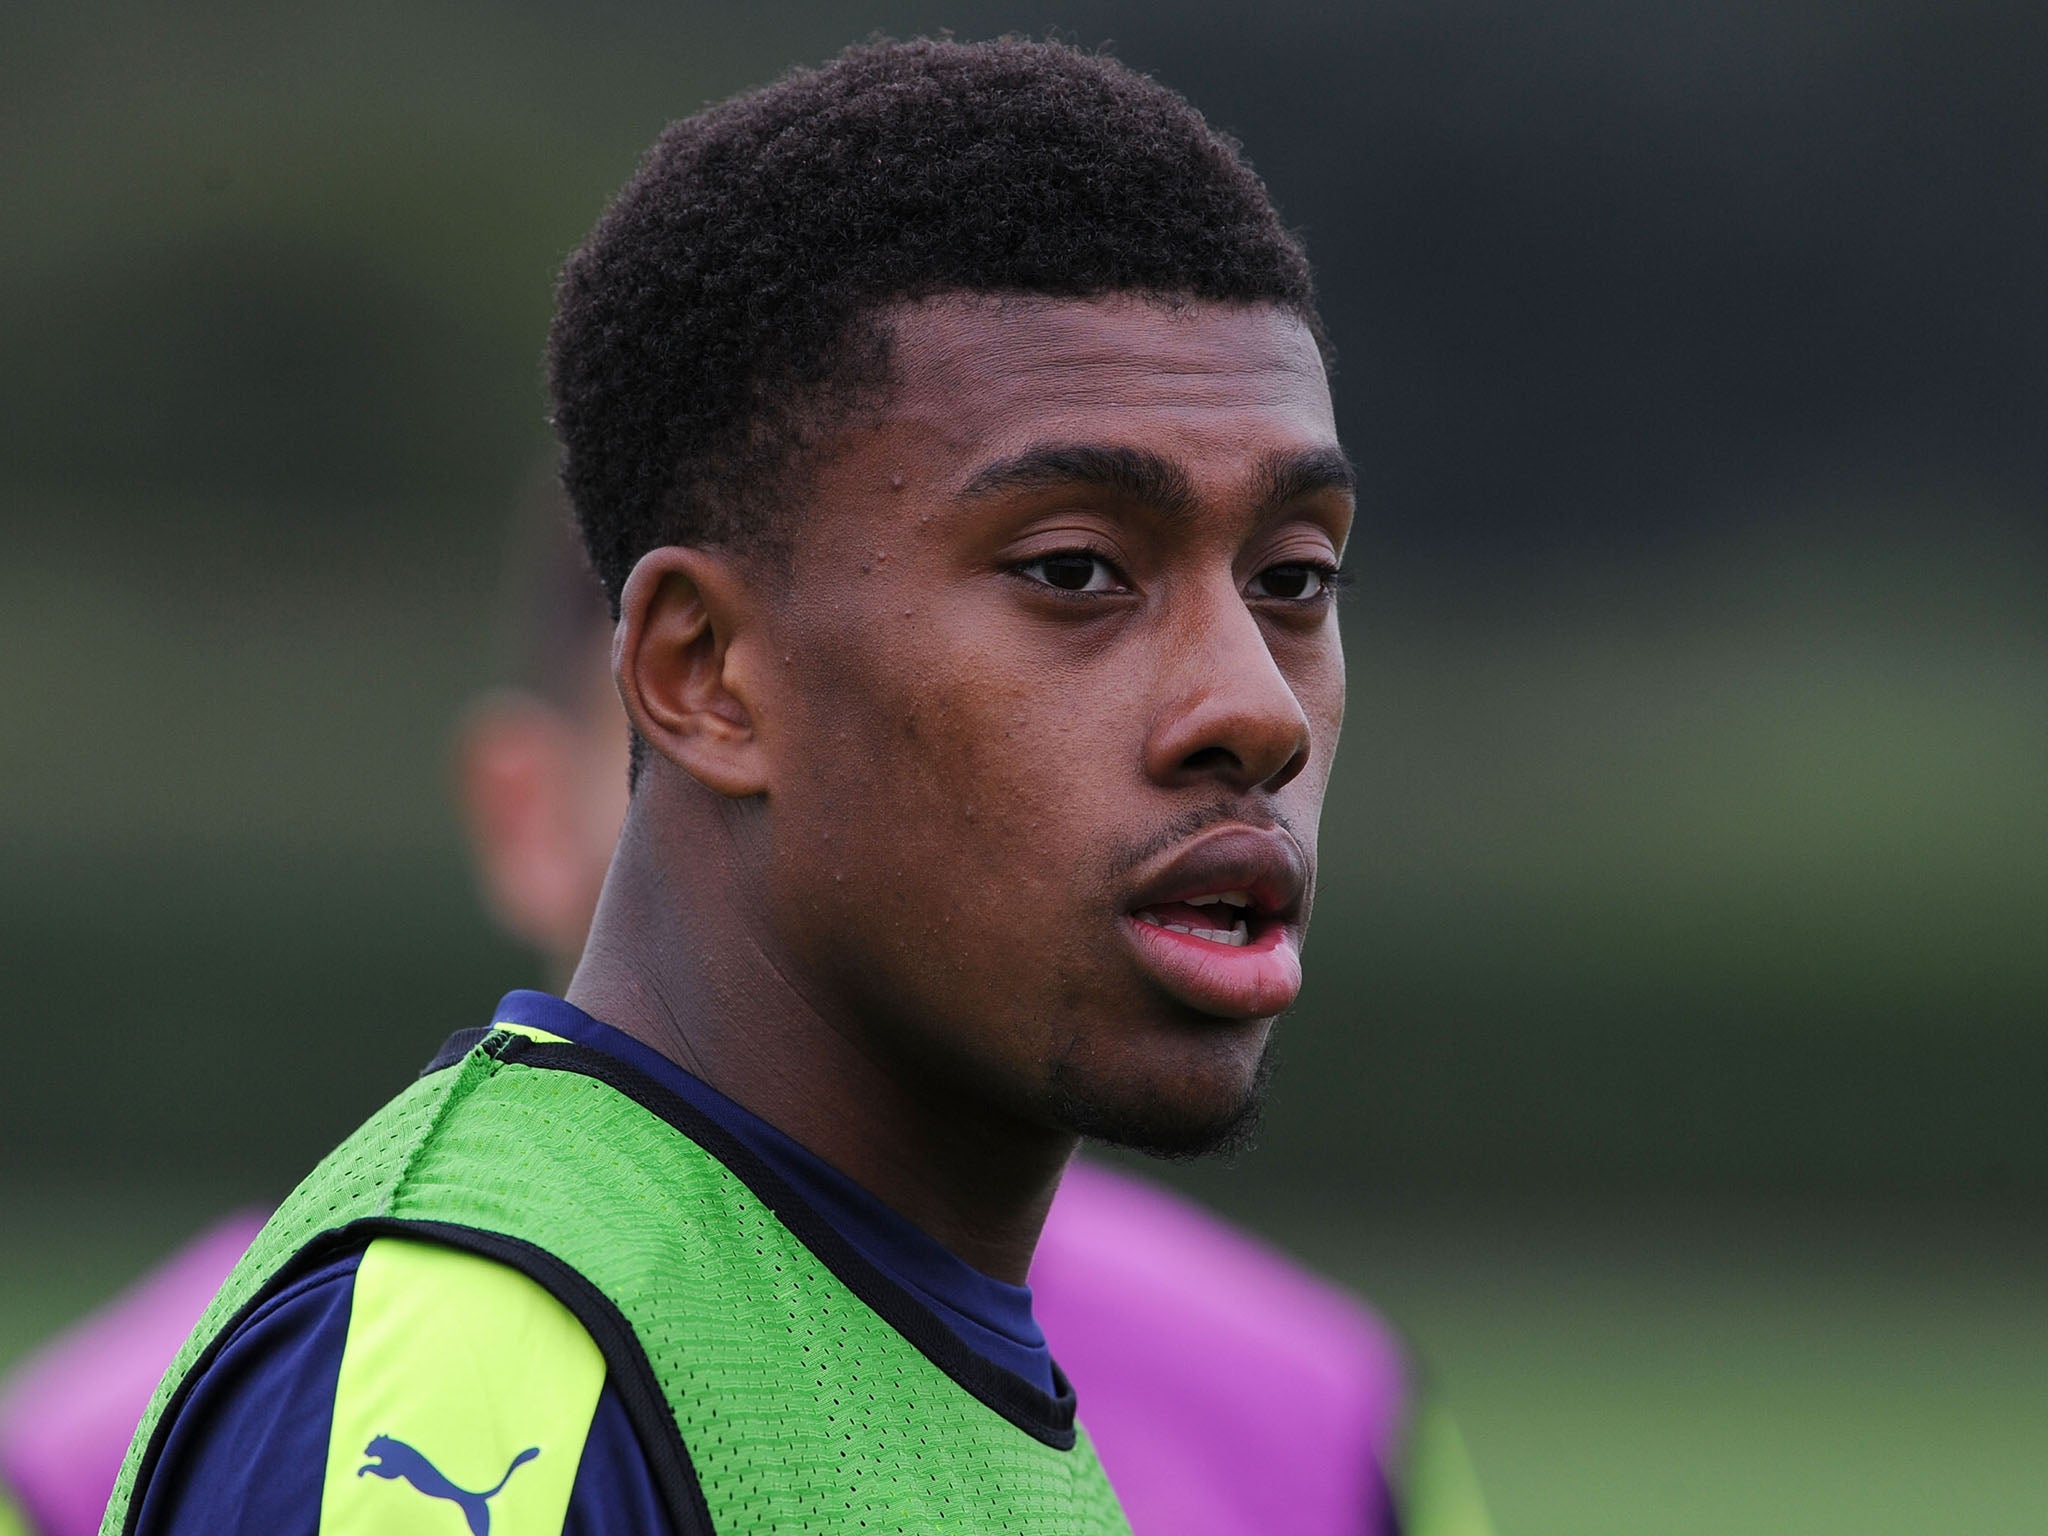 Iwobi said he was "a bit scared" by the incident